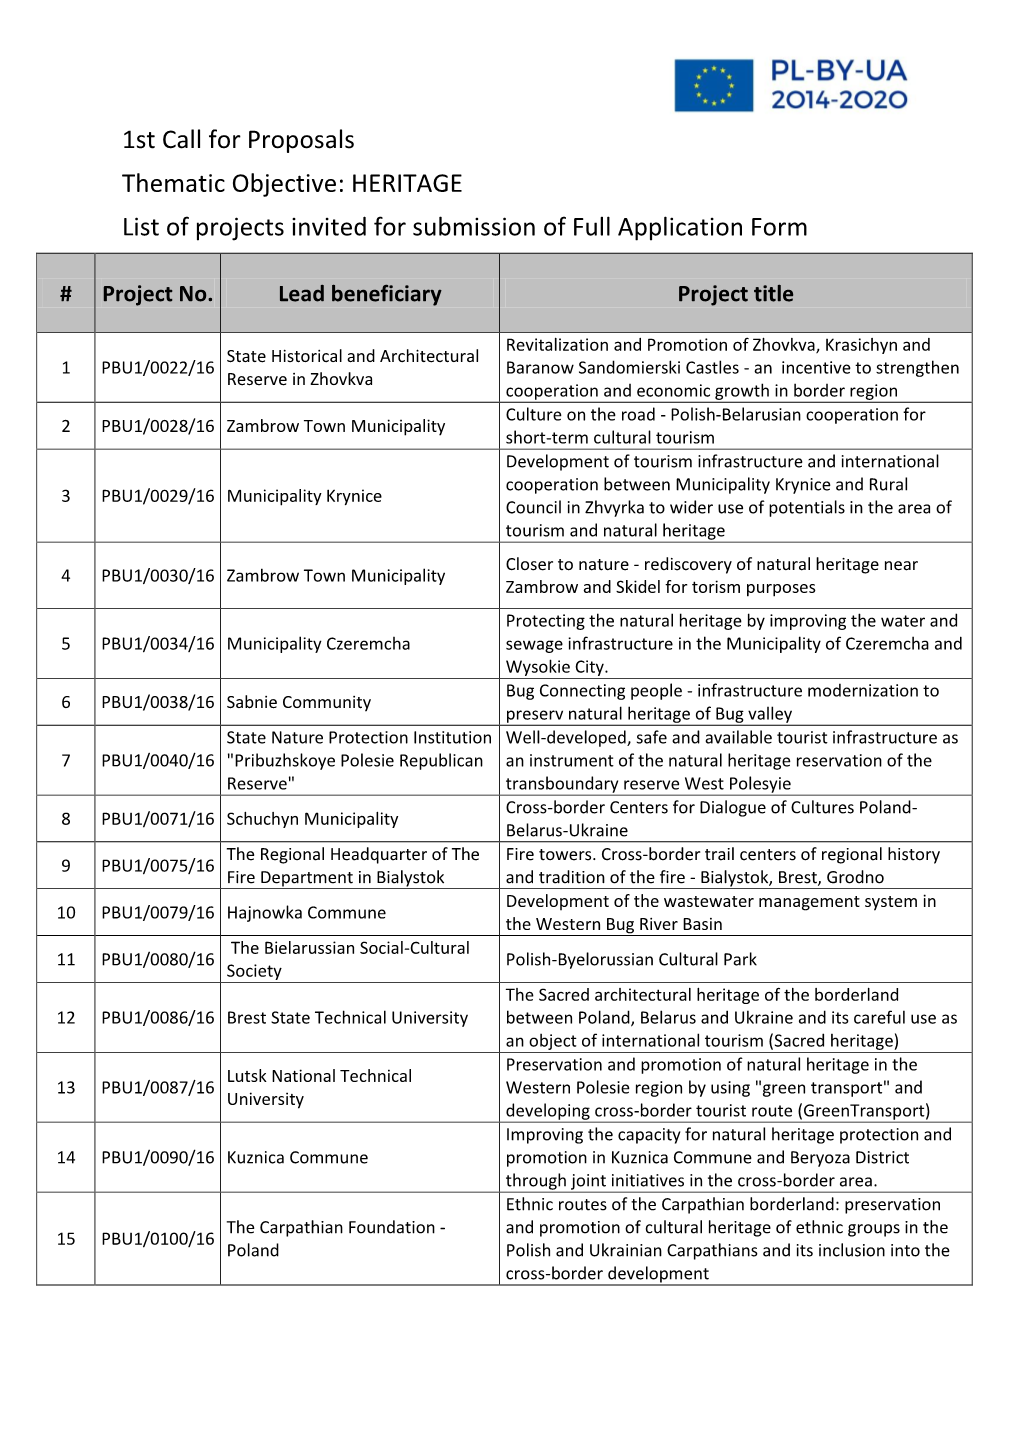 HERITAGE List of Projects Invited for Submission of Full Application Form